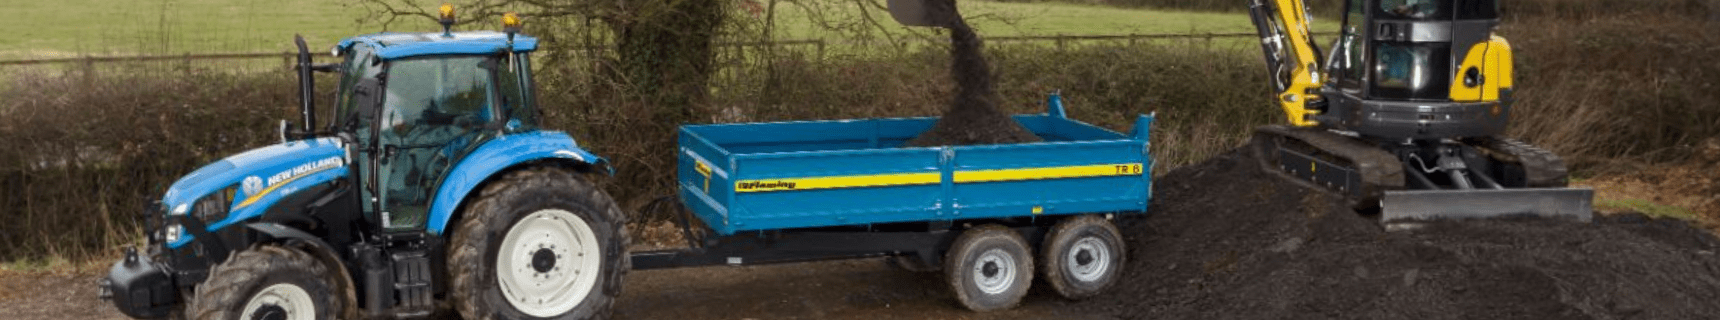 NC Trailers – Low Loader Trailers Head Image